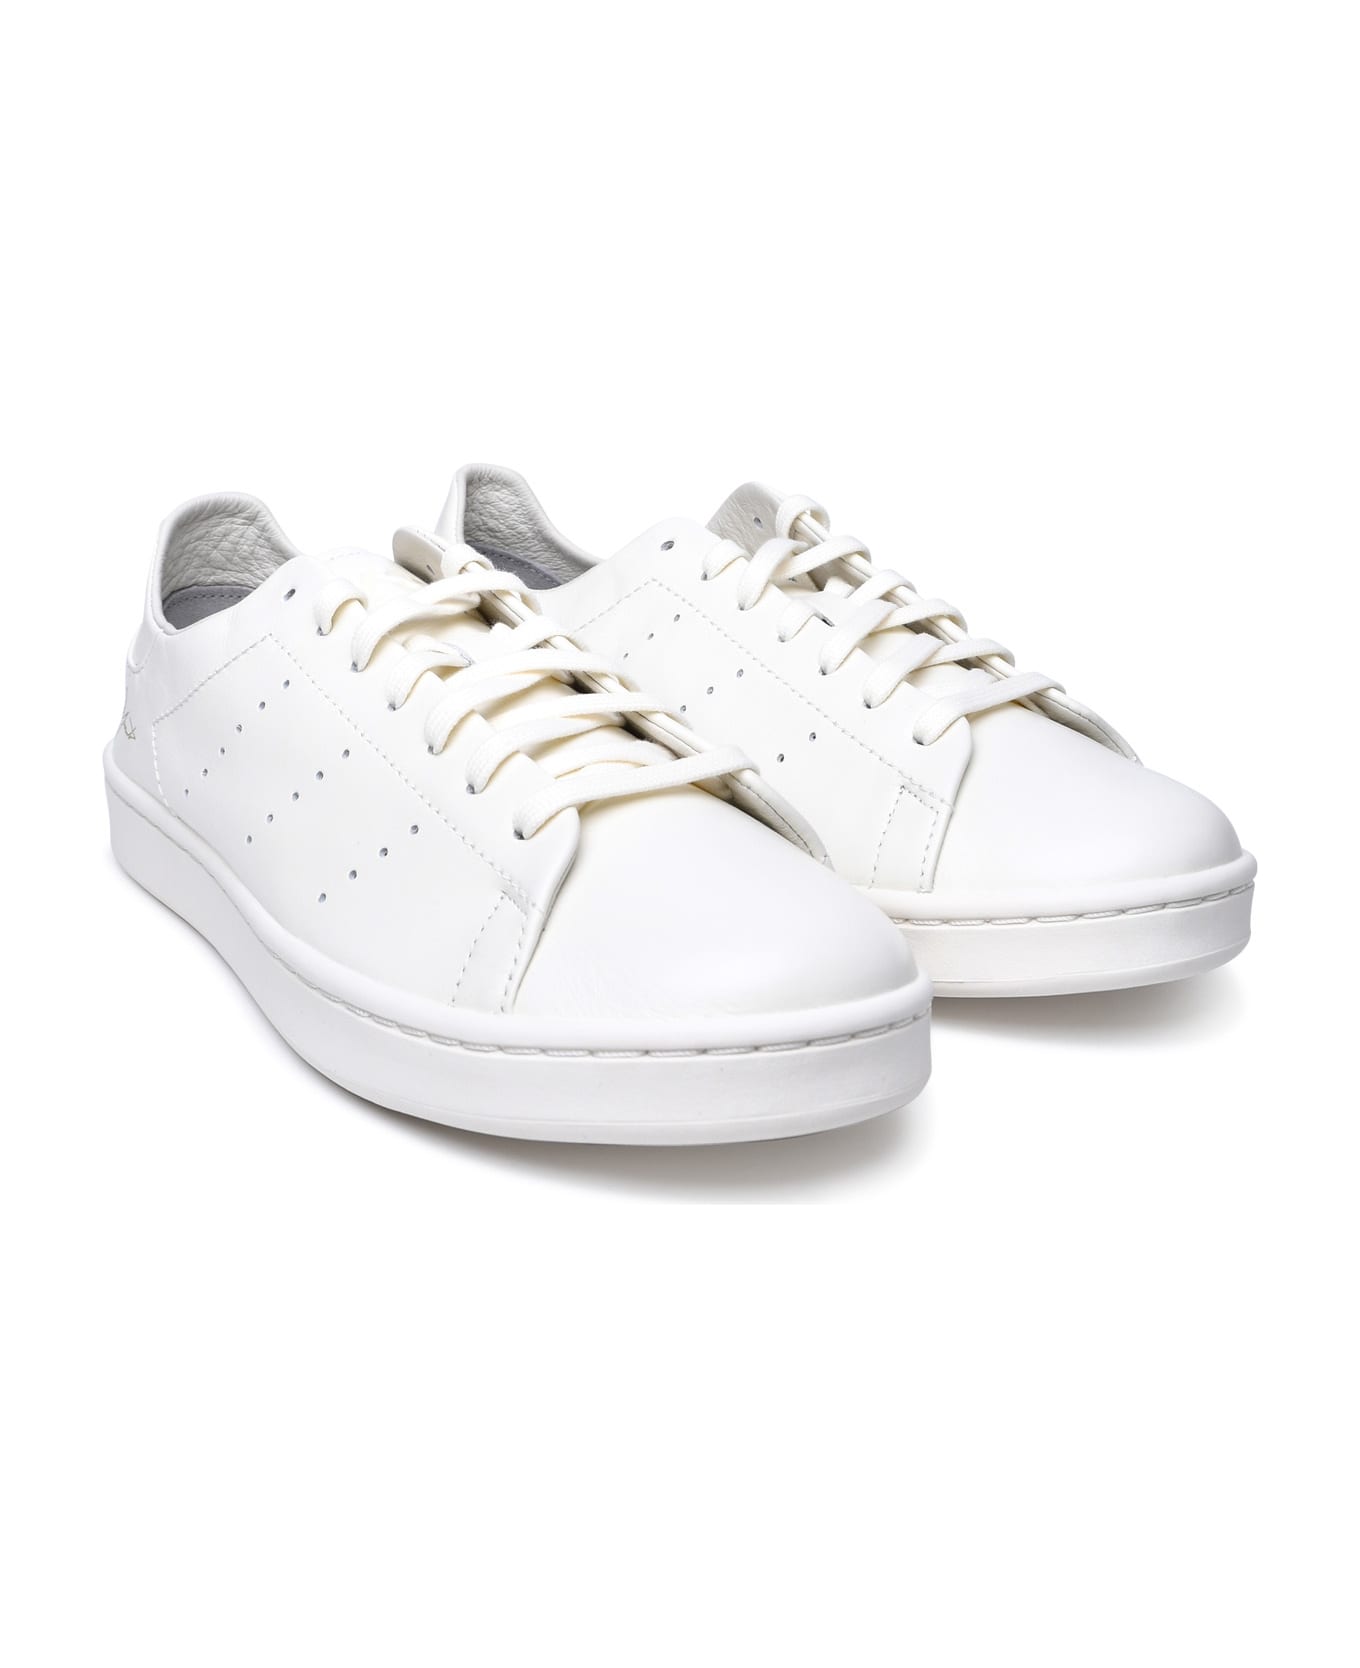 Y-3 Ivory Leather Sneakers - White